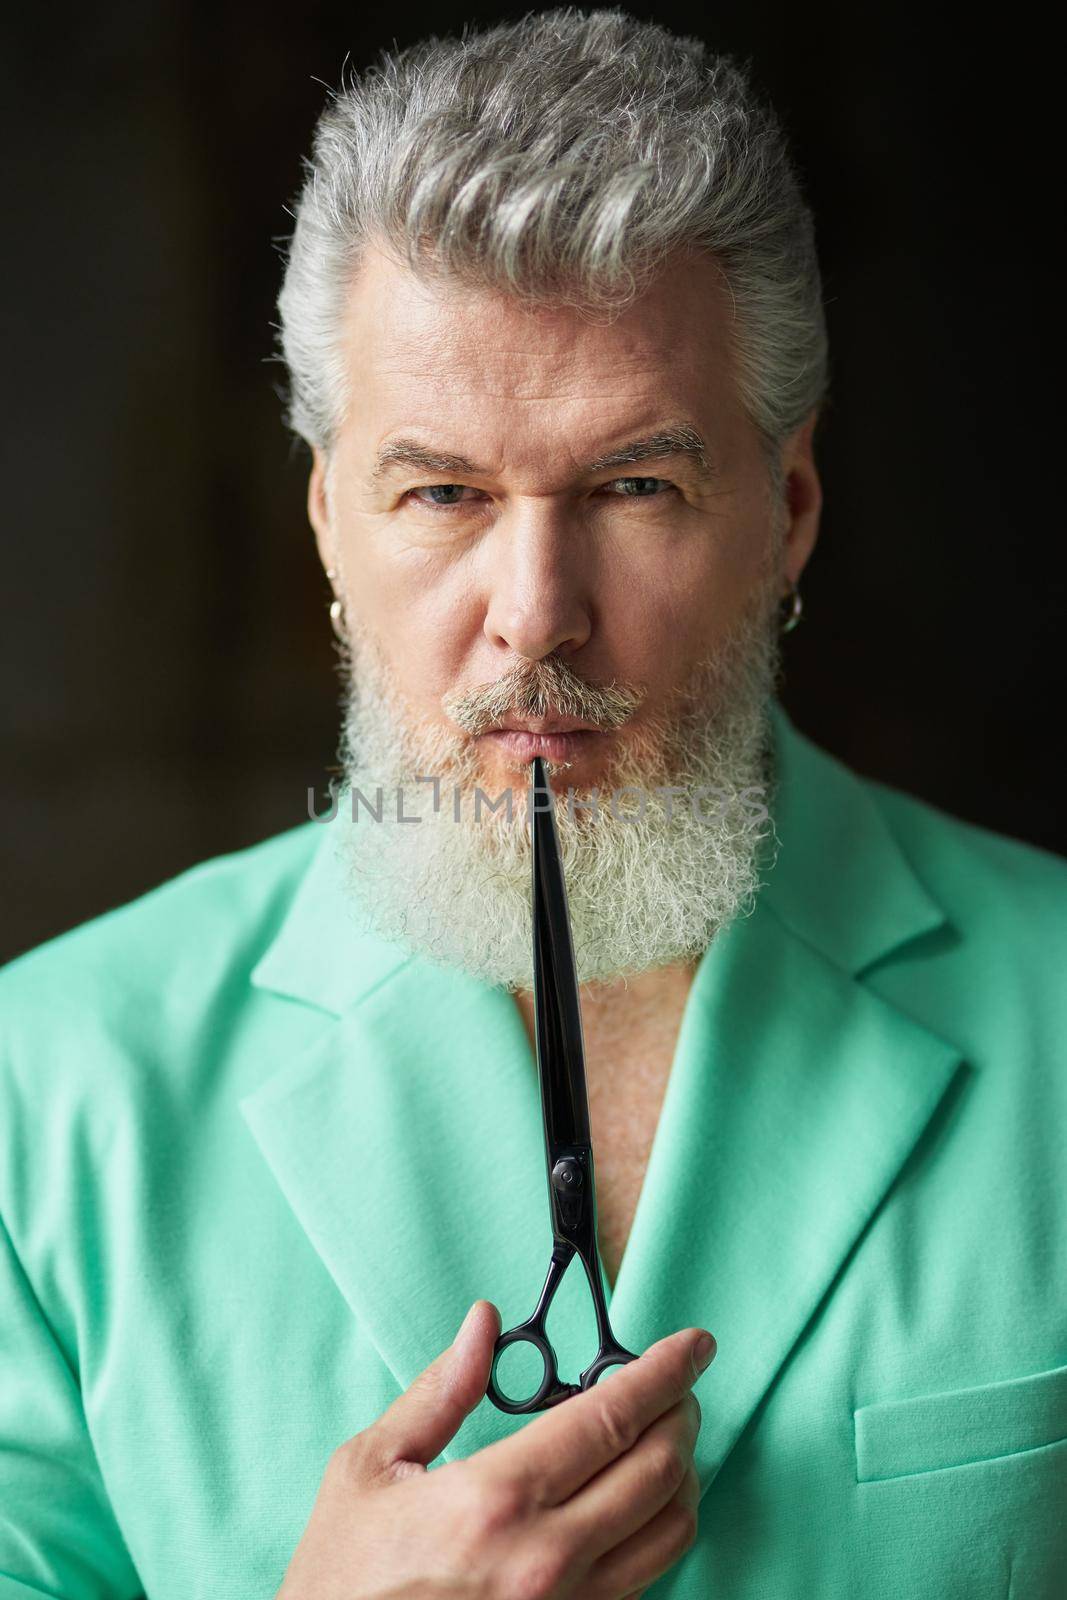 Portrait of serious gray haired mature man with beard wearing colorful outfit looking at camera, holding sharp barber scissors near his face, posing over dark background. Professional occupation